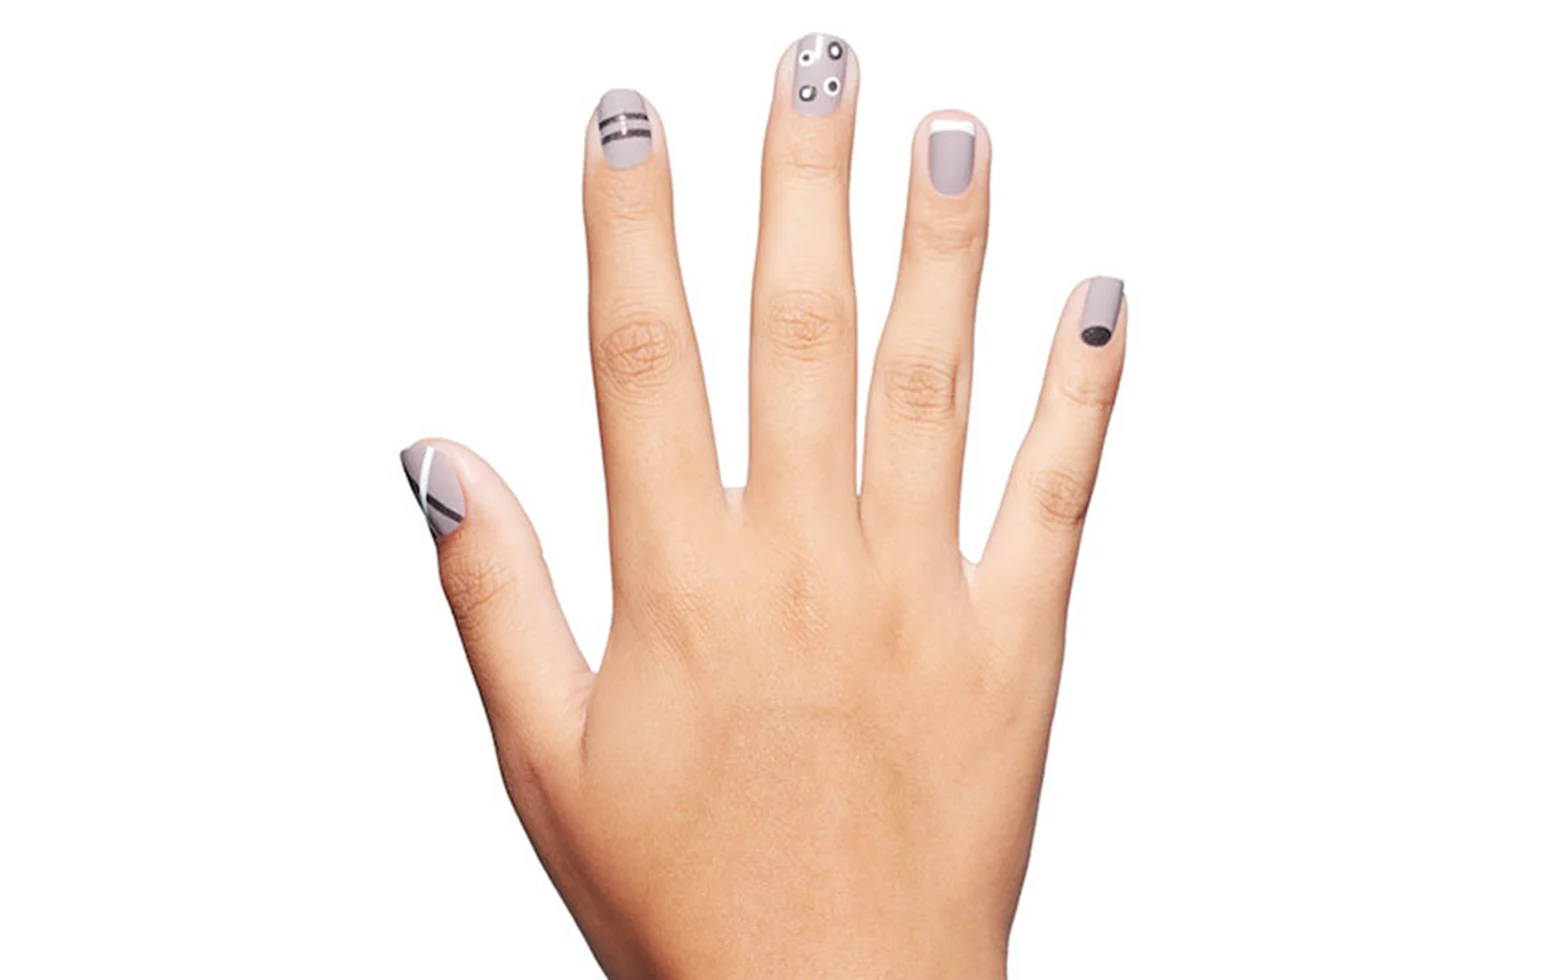 7. 10 Cute and Simple Nail Art Designs for Kids - wide 3